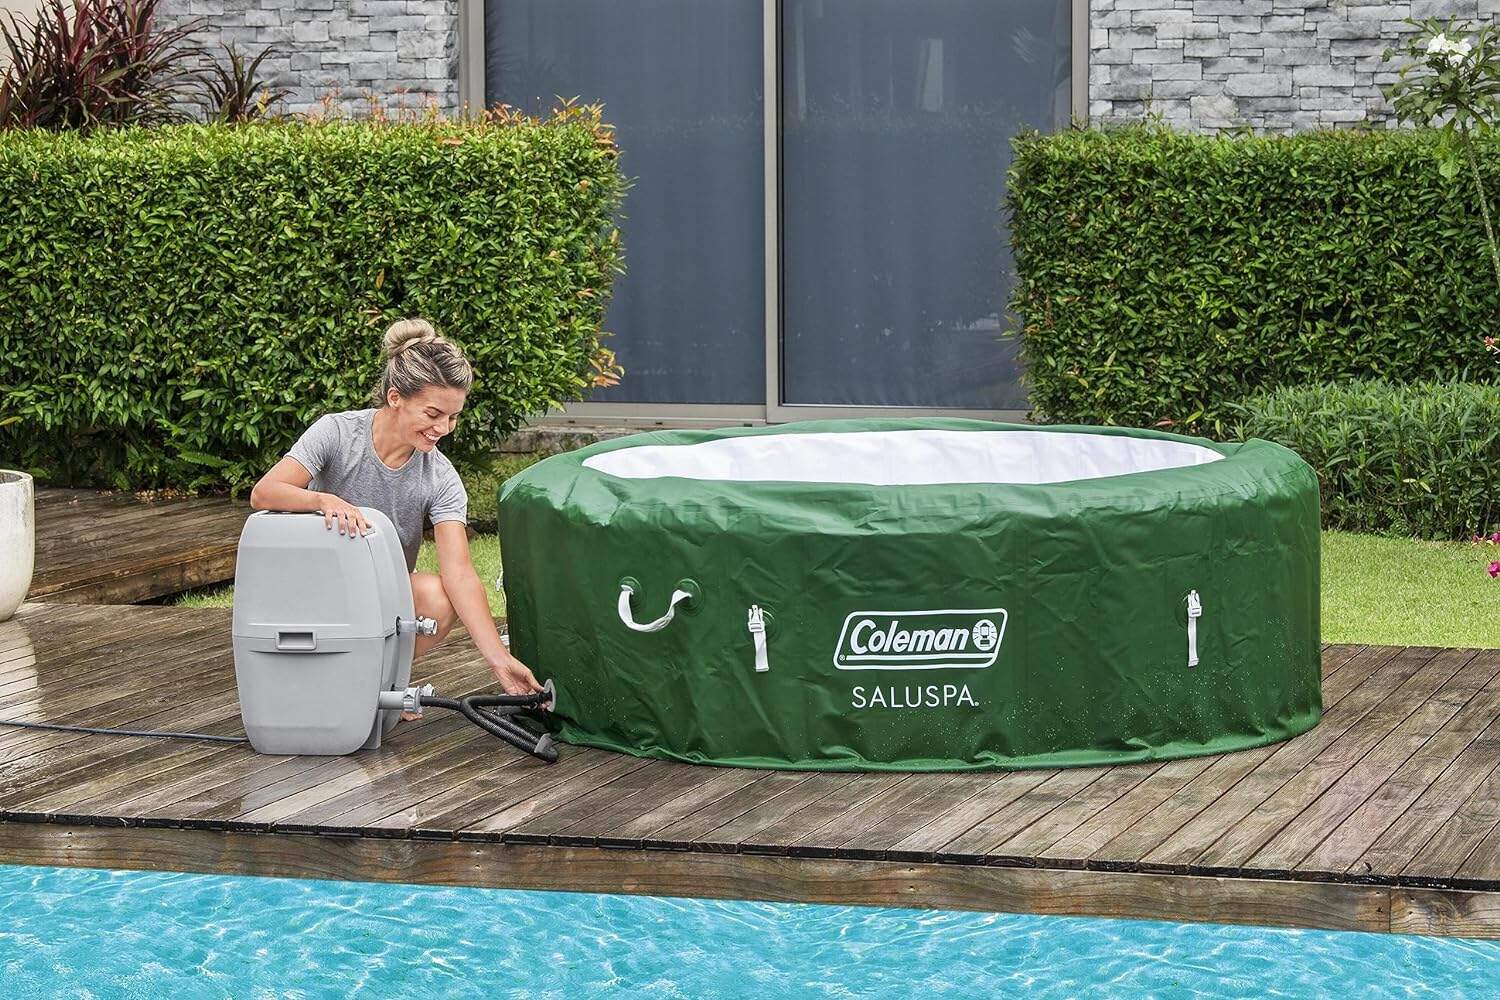 How To Inflate Coleman Saluspa Inflatable Hot Tub